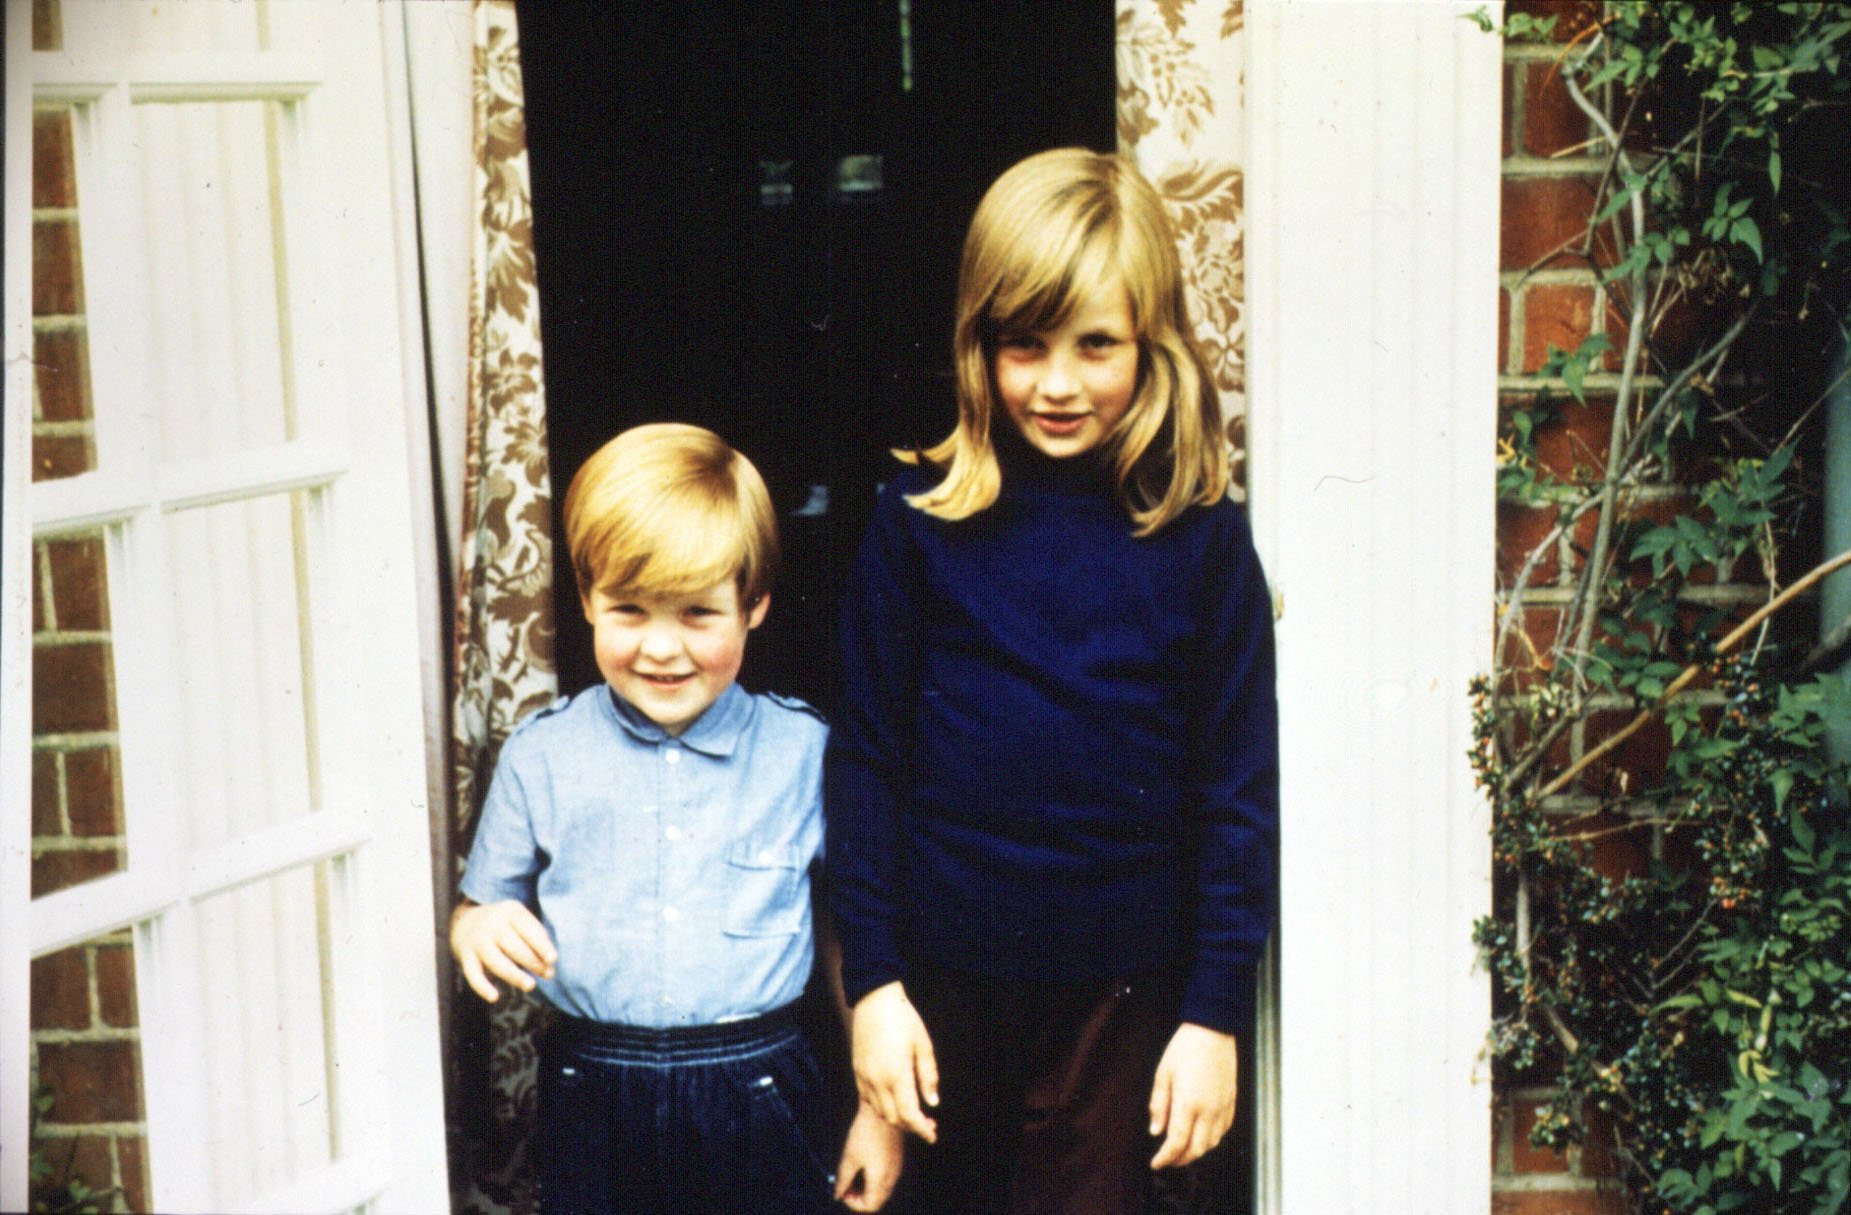 A family file picture of Lady Diana Spencer (Diana Princess of Wales) with her younger brother Charles, Lord Althorp (Earl Spencer) in 1968. / Source: Getty Images